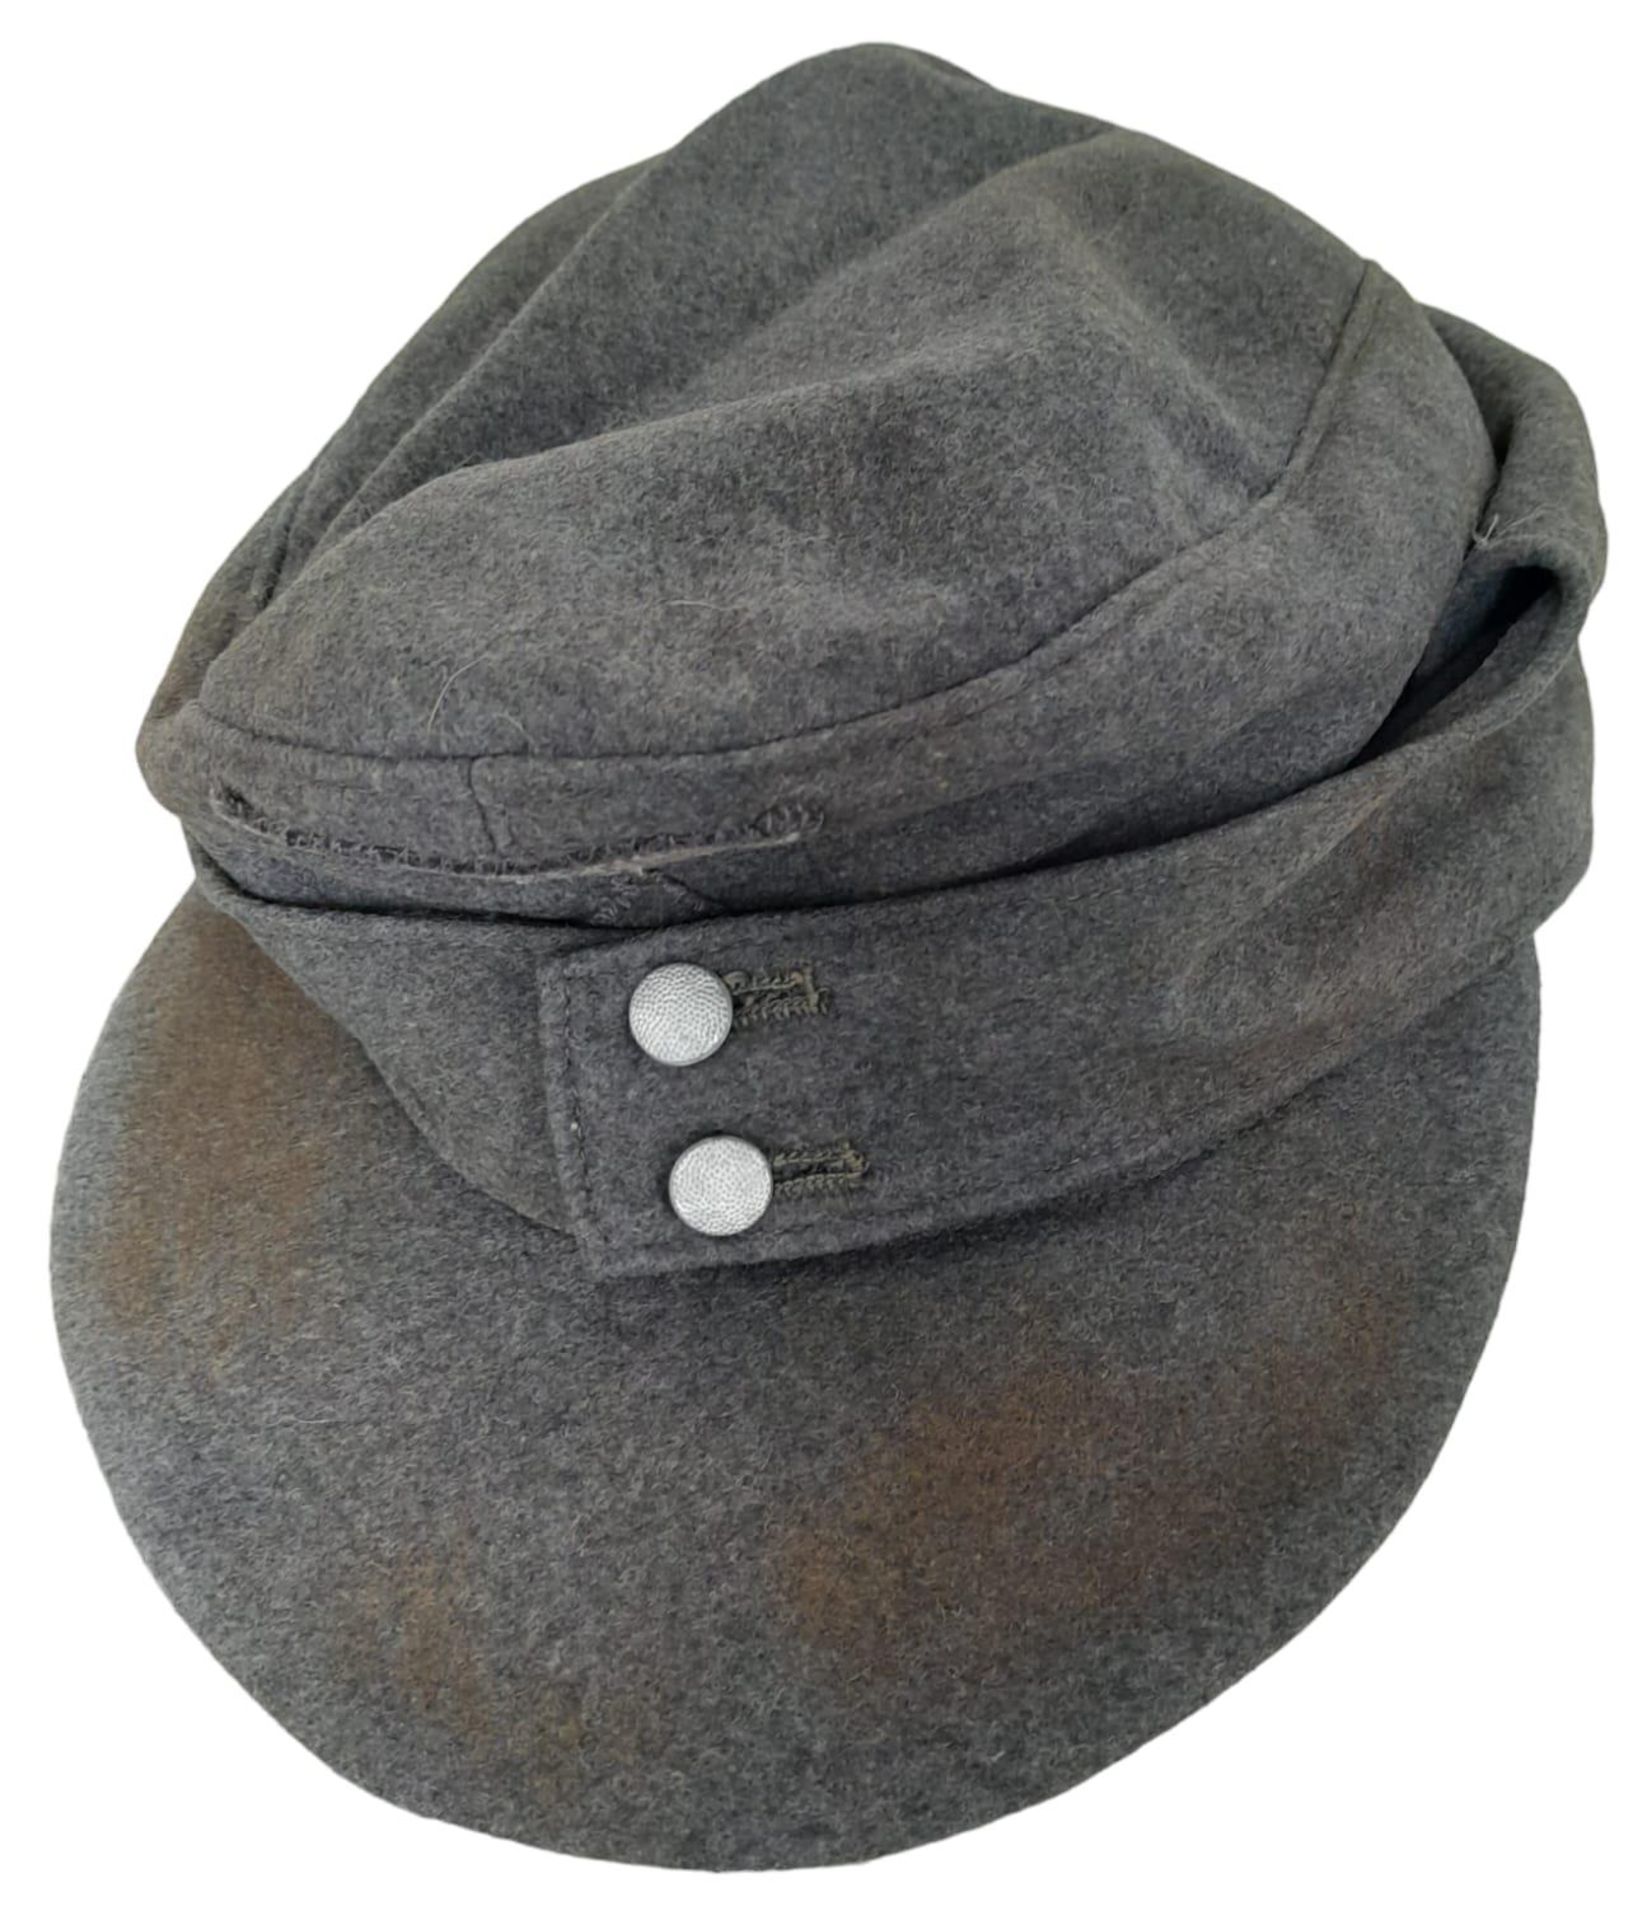 WW2 German Luftwaffe Enlisted Mans/Nco’s Private Purchase M43 Cap. - Image 5 of 11